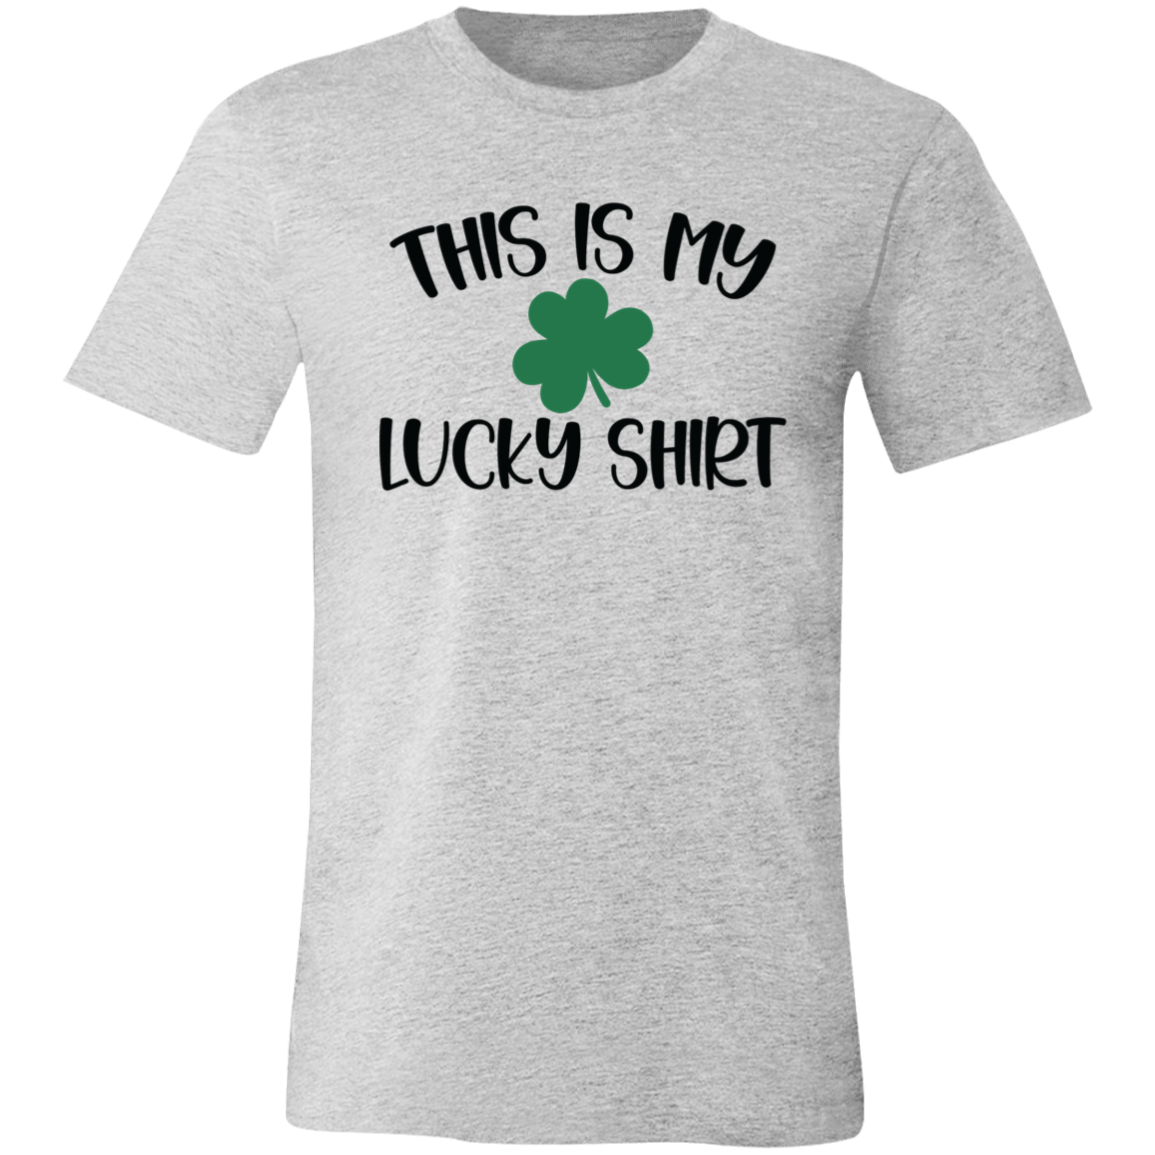 This Is My Lucky Shirt T-Shirt (Unisex)